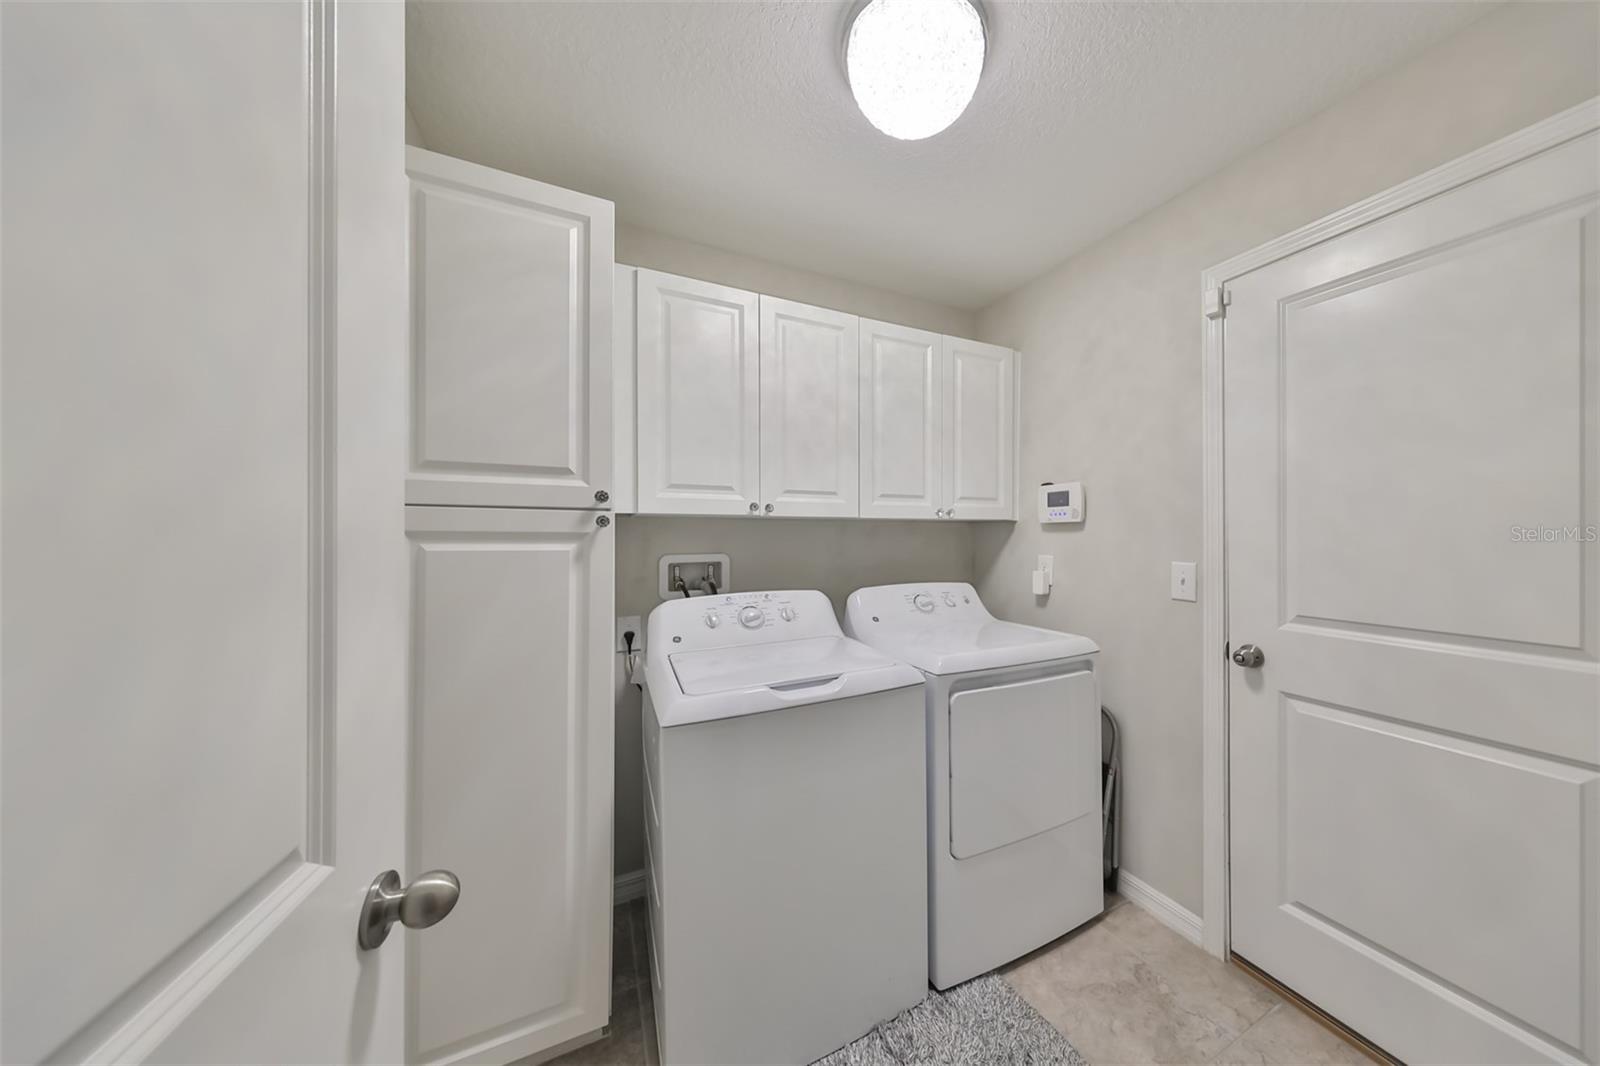 Laundry room has been upgraded with beautiful white cabinetry.